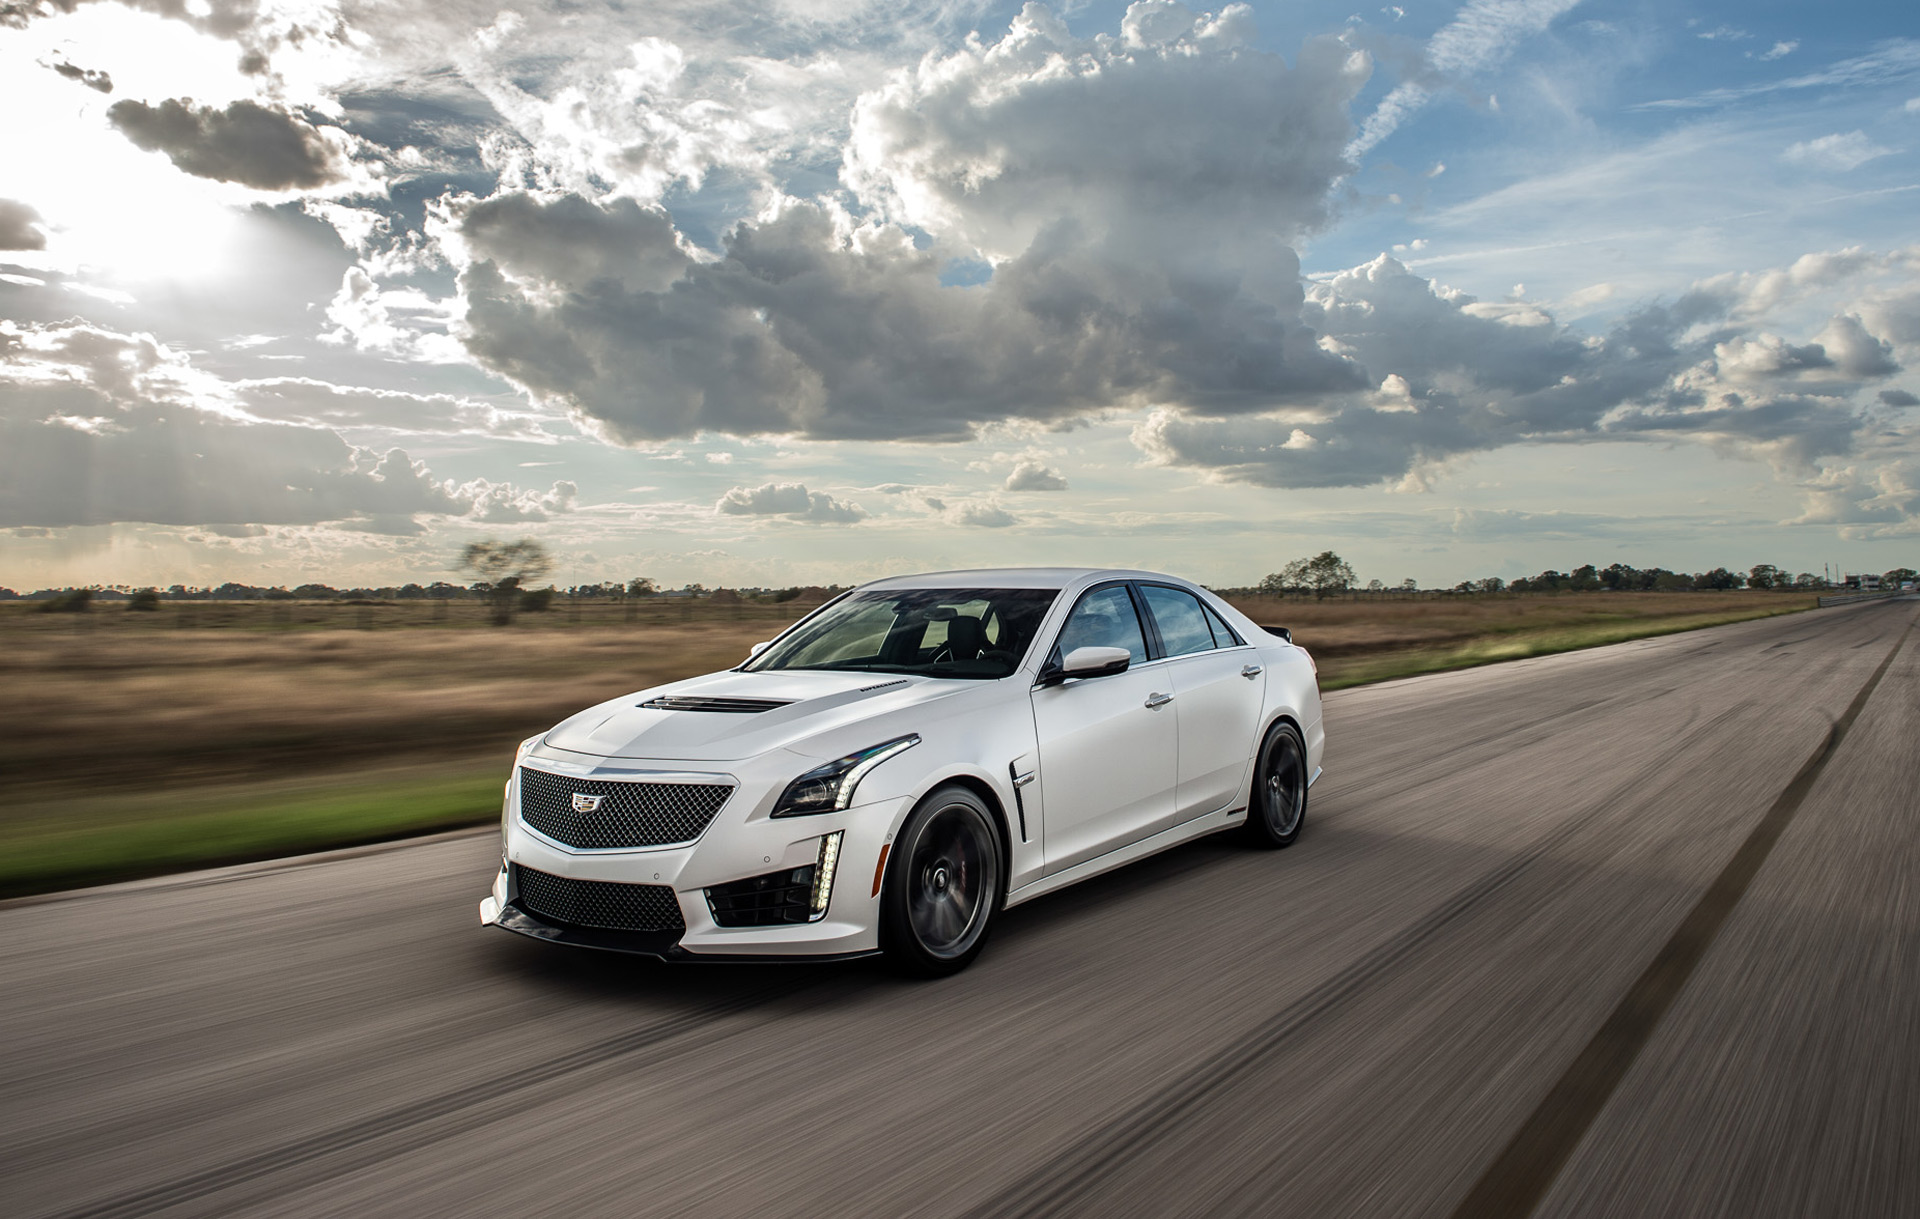 Hennessey's 1,000-horsepower Cadillac CTS-V hits the track and dyno